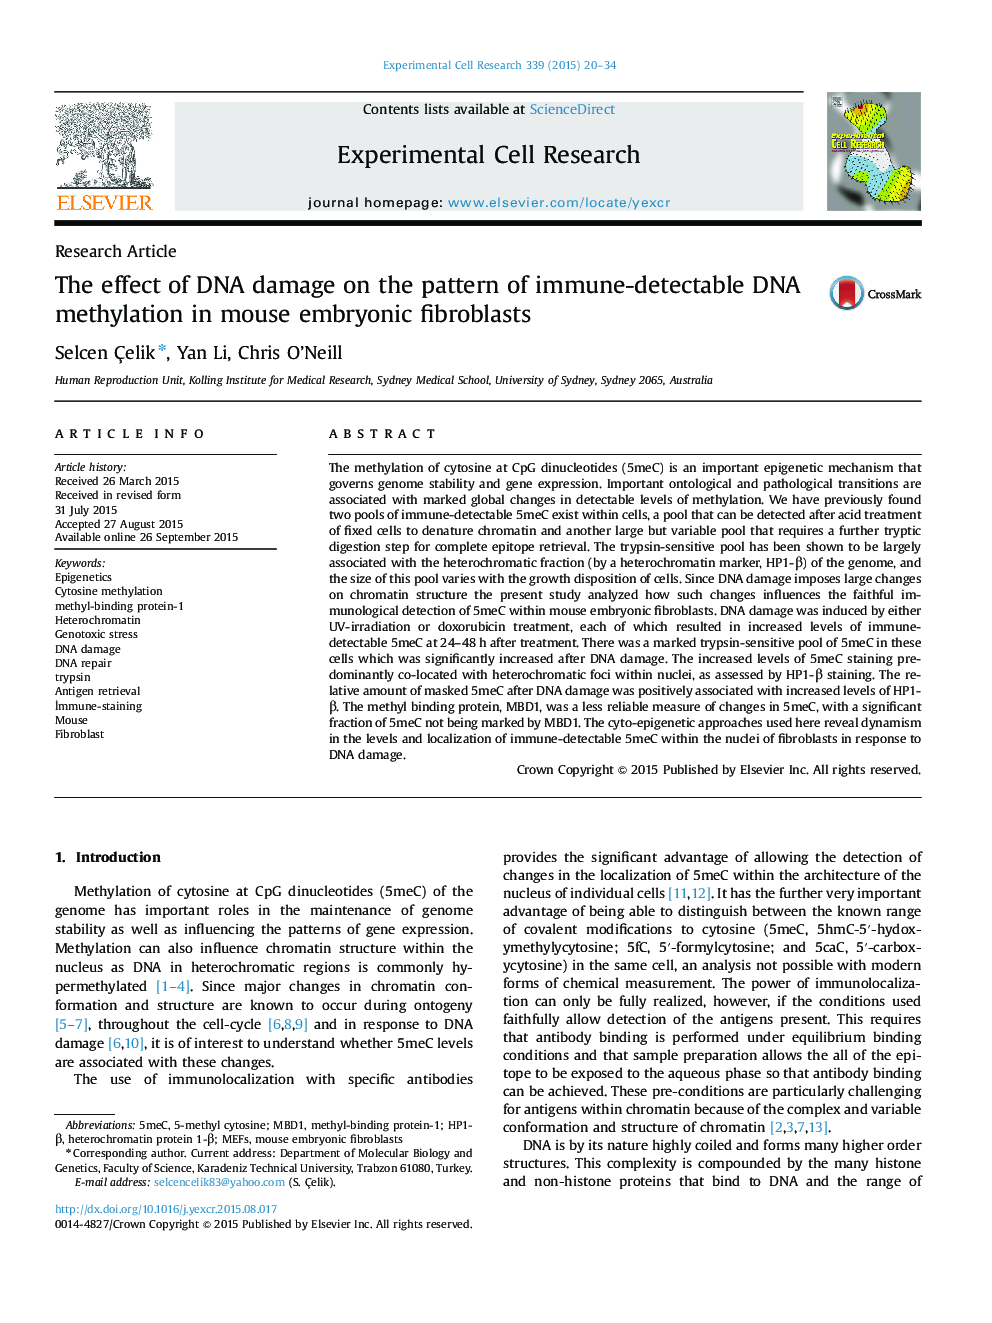 The effect of DNA damage on the pattern of immune-detectable DNA methylation in mouse embryonic fibroblasts